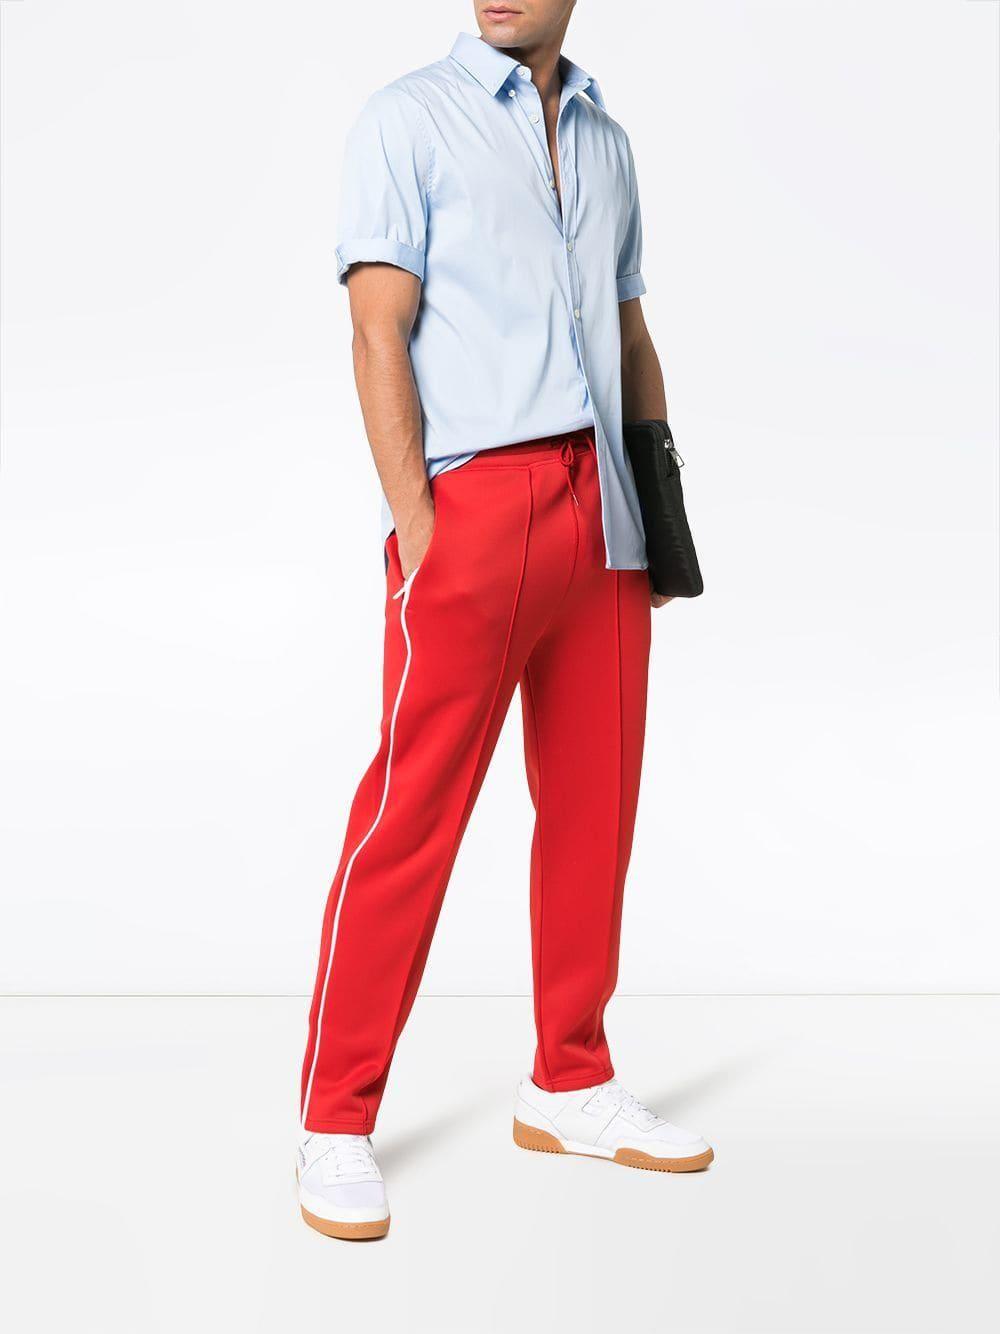 Red Person Logo - Kenzo Red Logo Print Cotton Blend Sweat Pants in Red for Men - Save ...